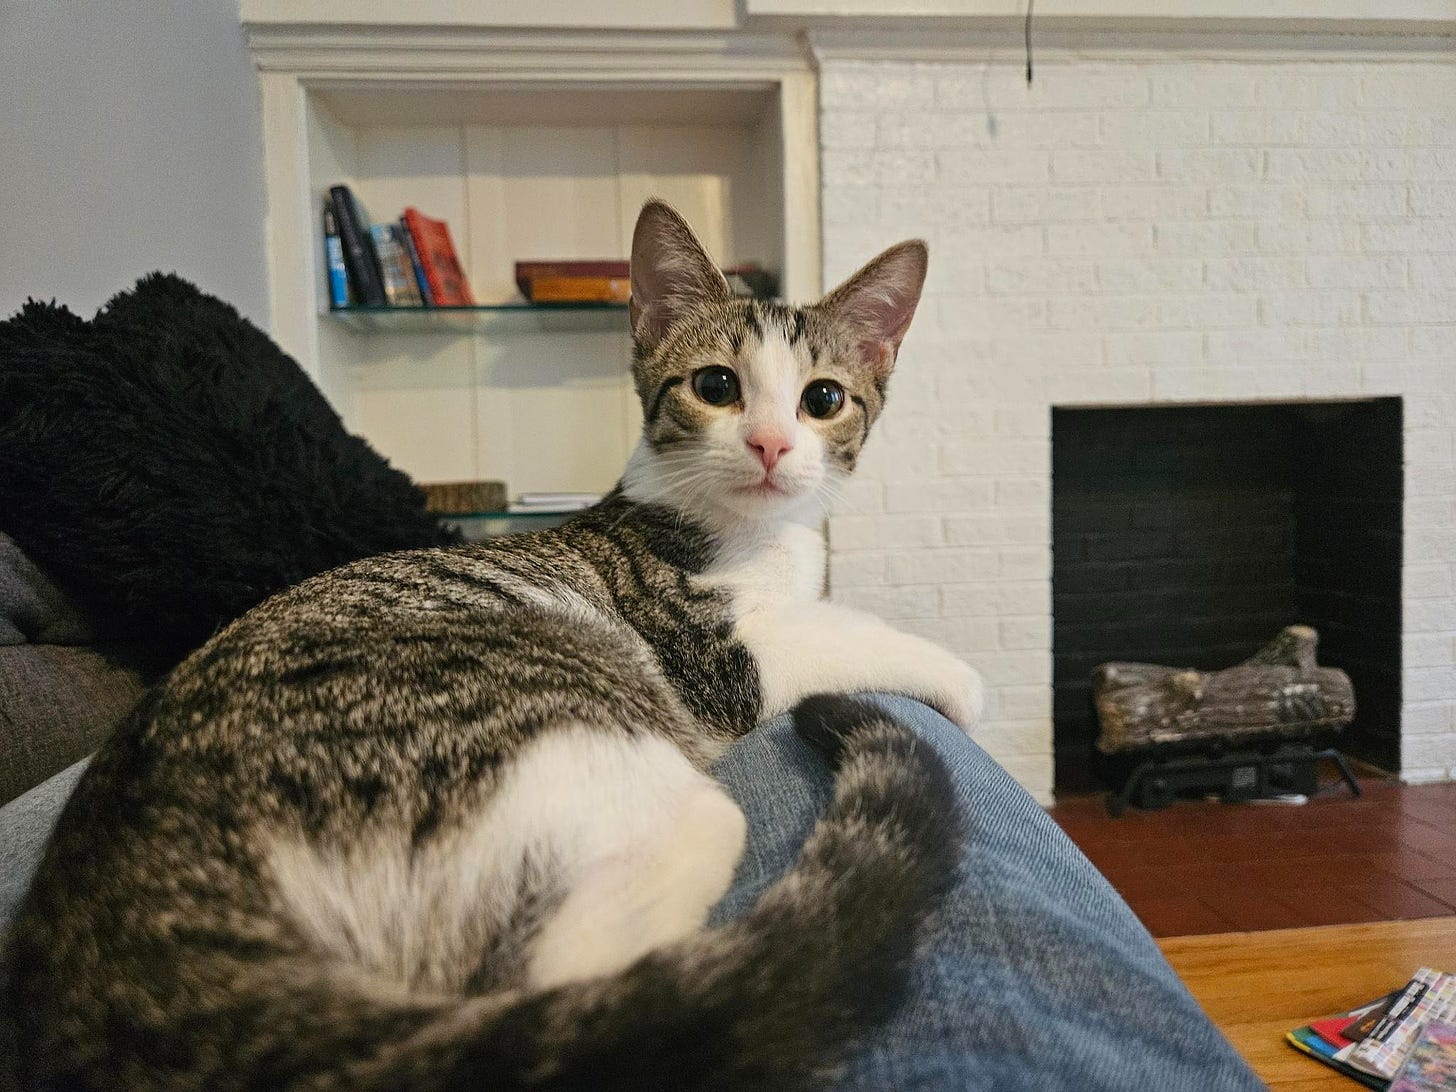 A tabby/white cat sitting on someone's legs